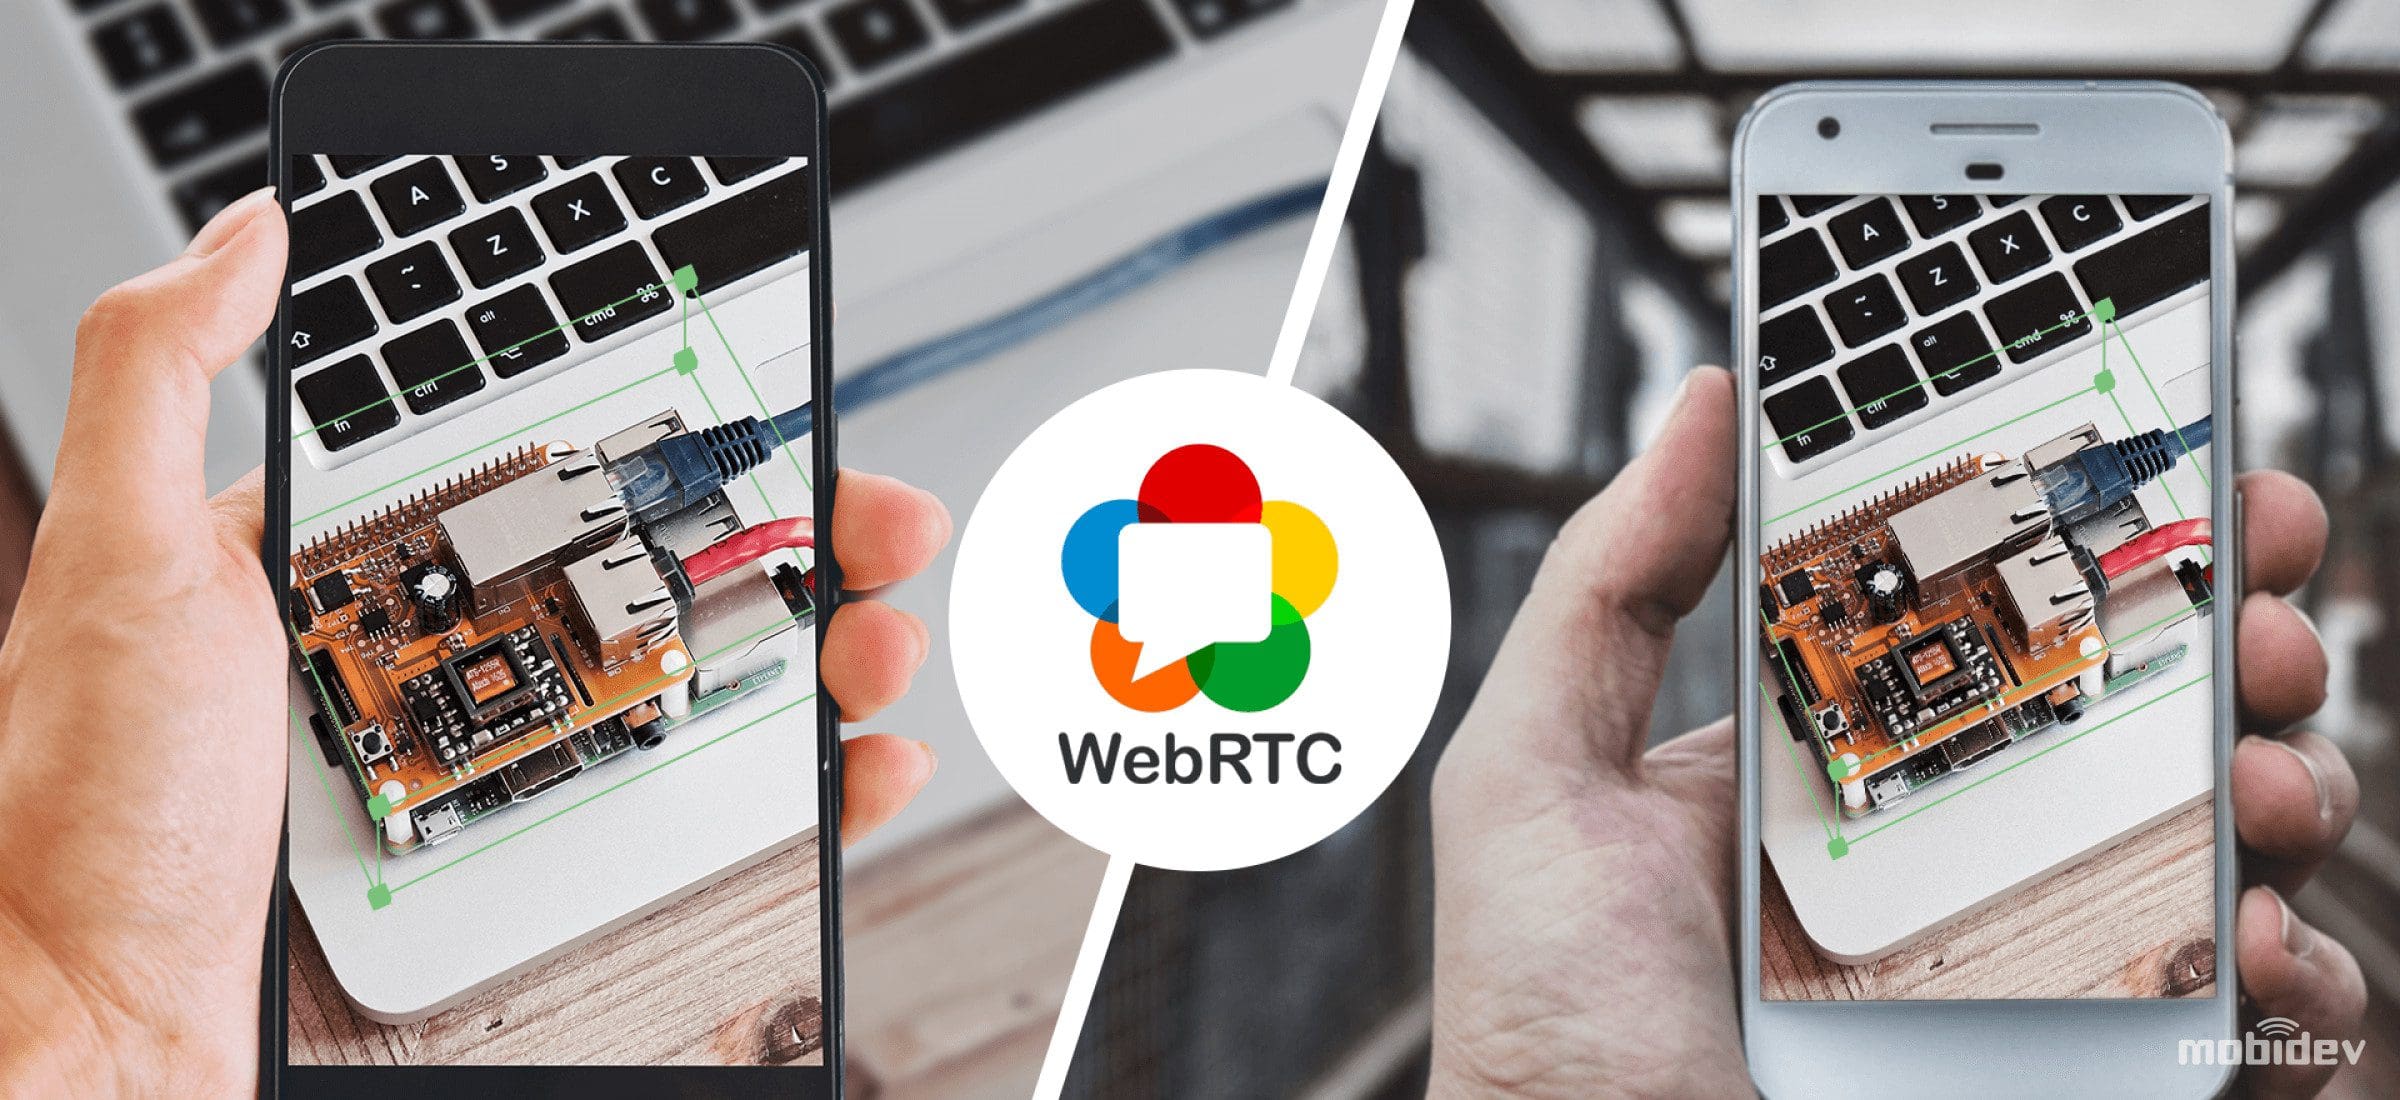 Augmented Reality For Remote Assistance Based On Shared AR & WebRTC